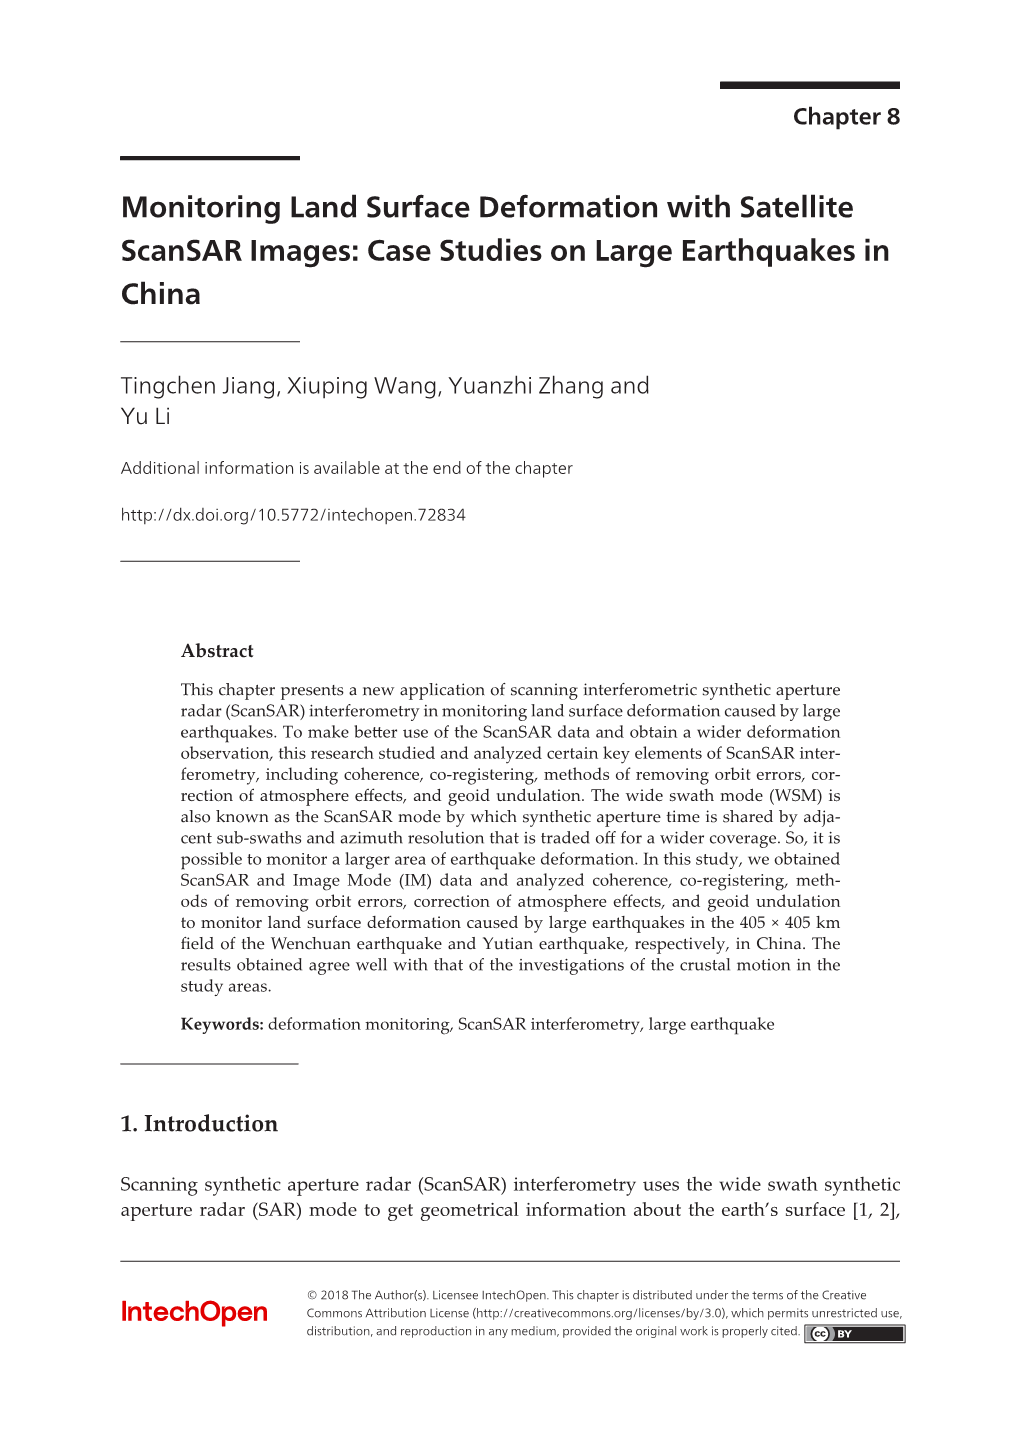 Monitoring Land Surface Deformation with Satellite Scansar Images: Case Studies on Large Earthquakes in China